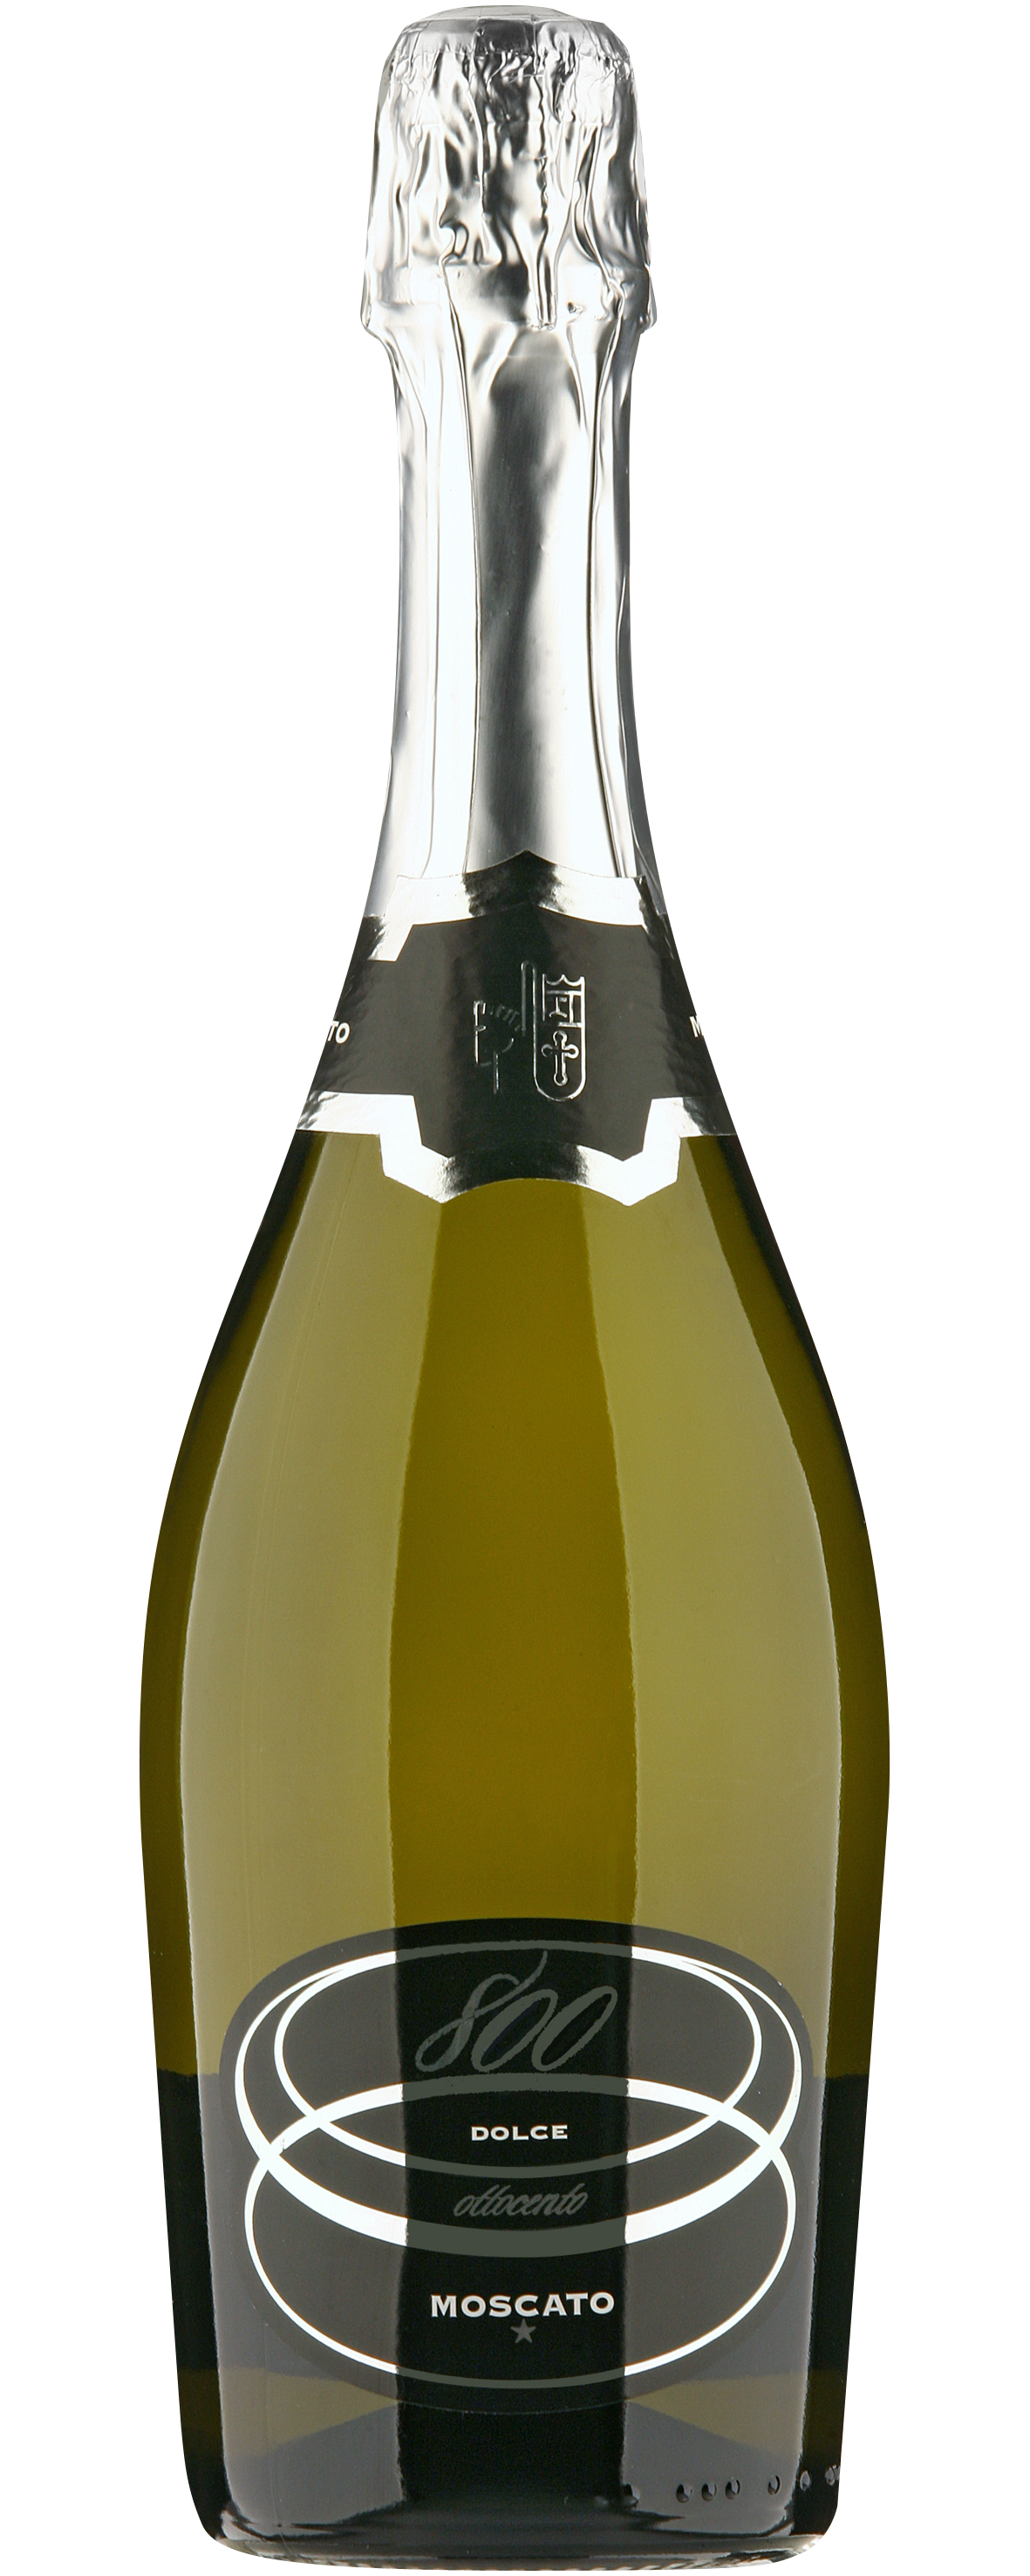 800 Moscato Spumante Dolce